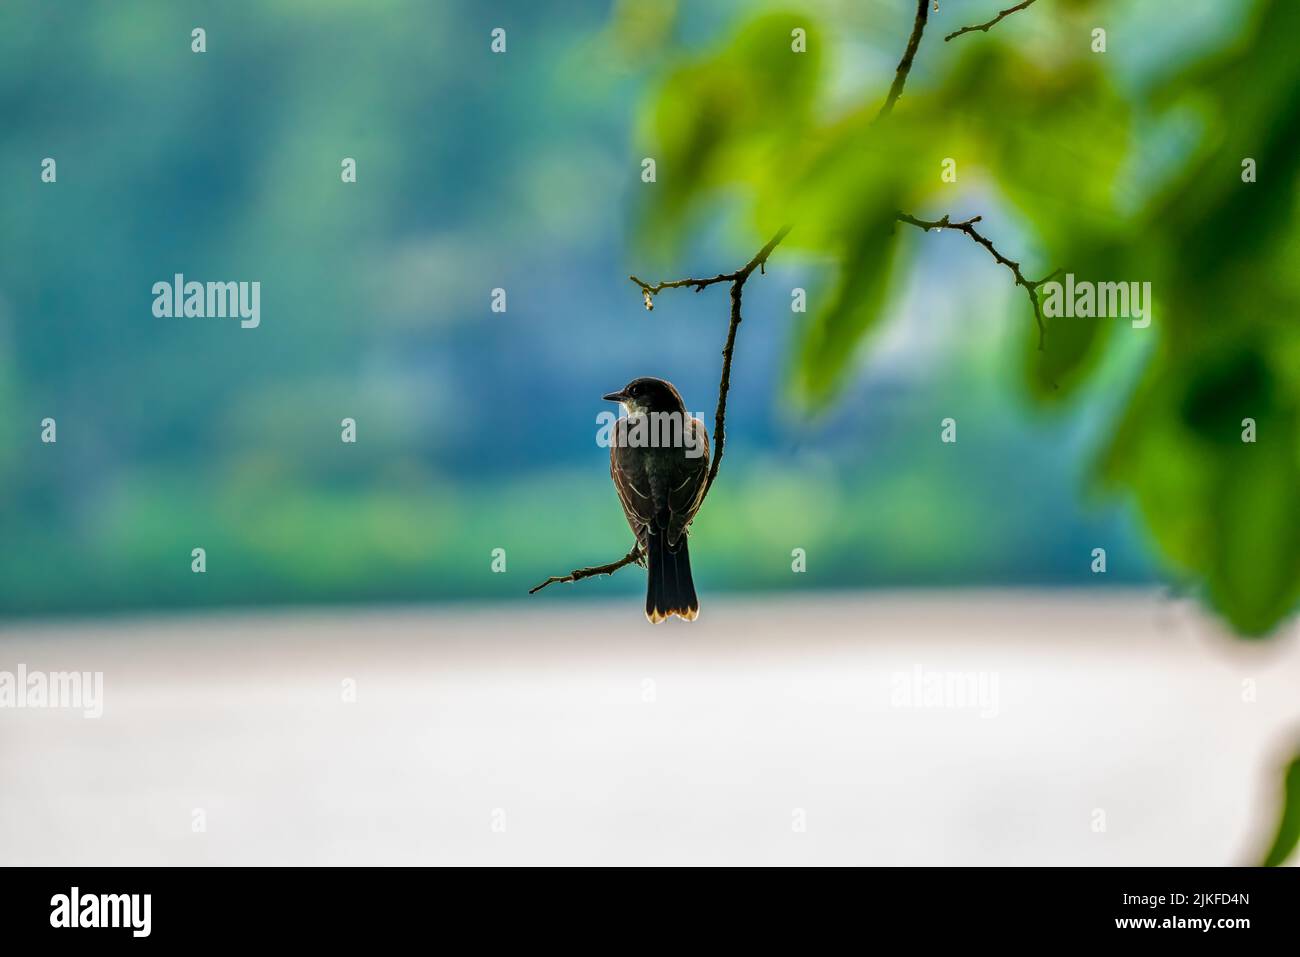 A closeup of an Eastern kingbird perched on a tree branch Stock Photo